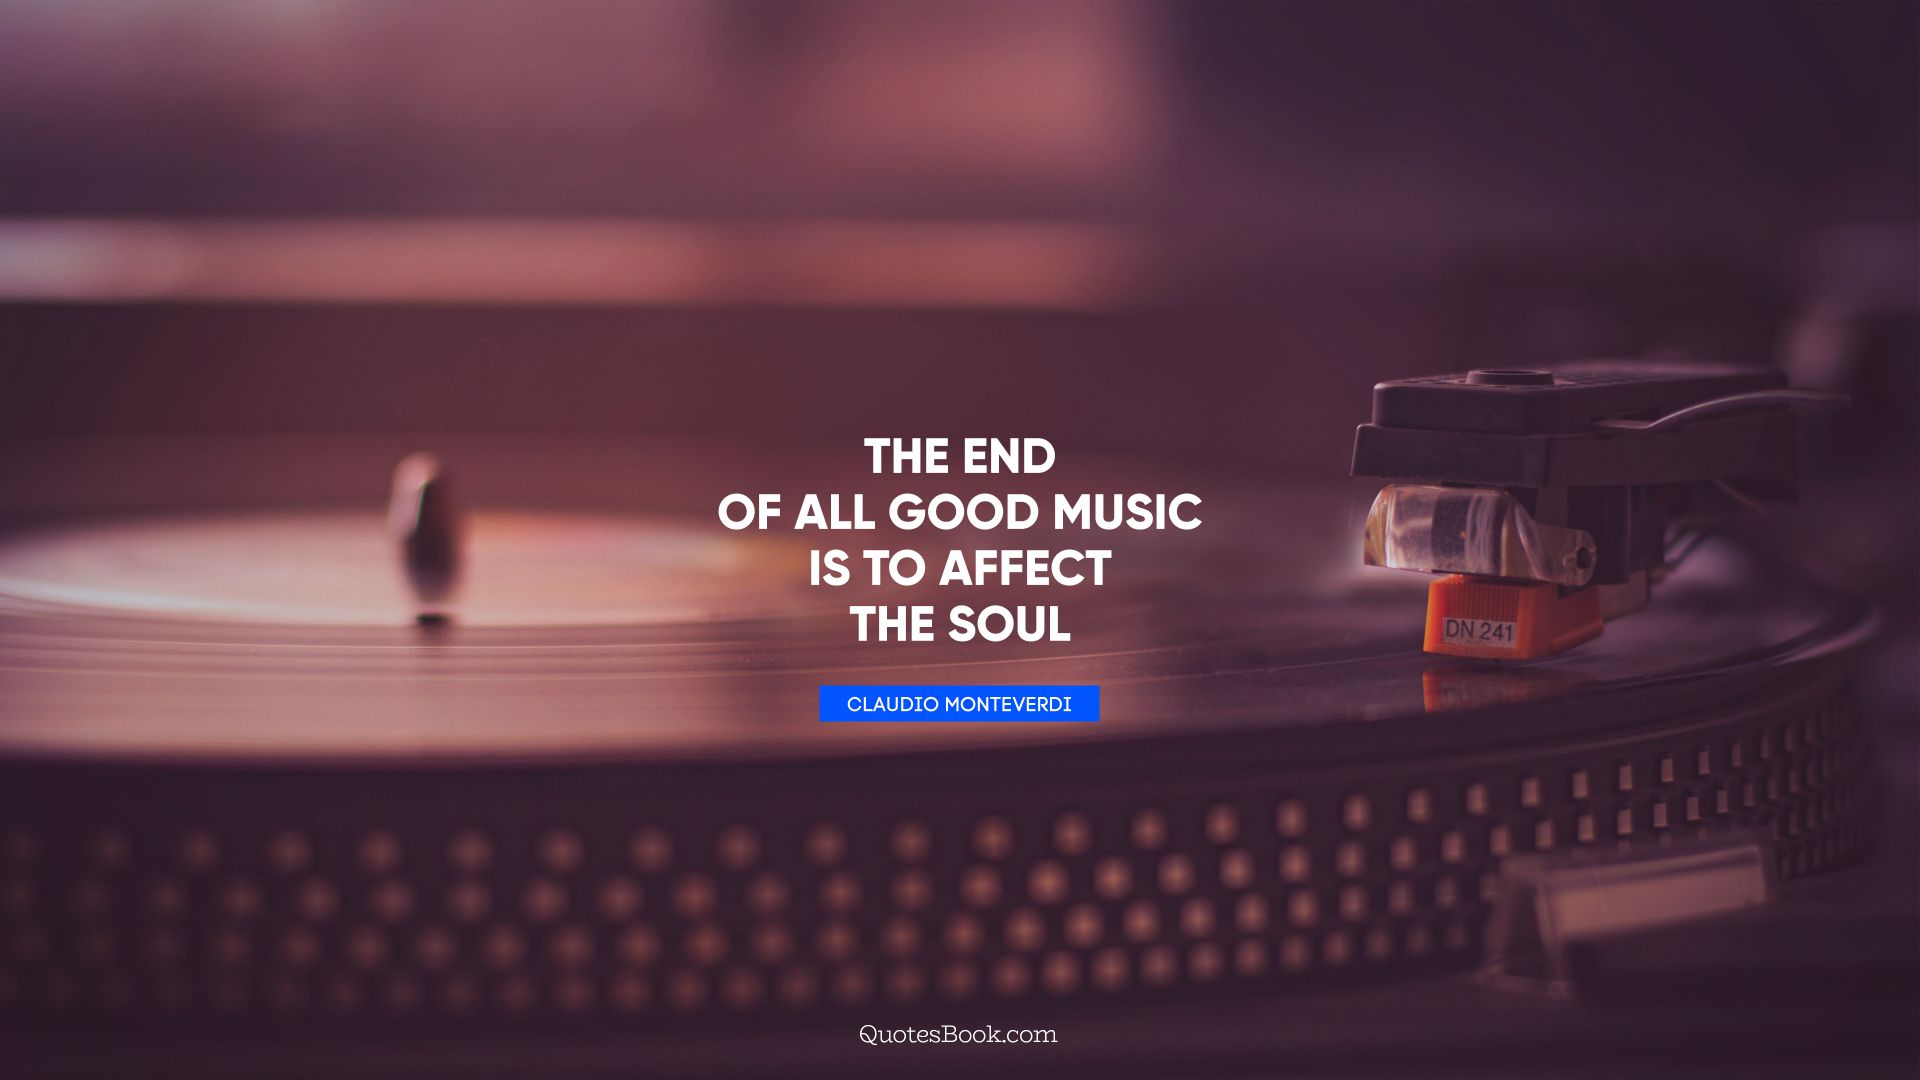 The end of all good music is to affect the soul. - Quote by Claudio Monteverdi